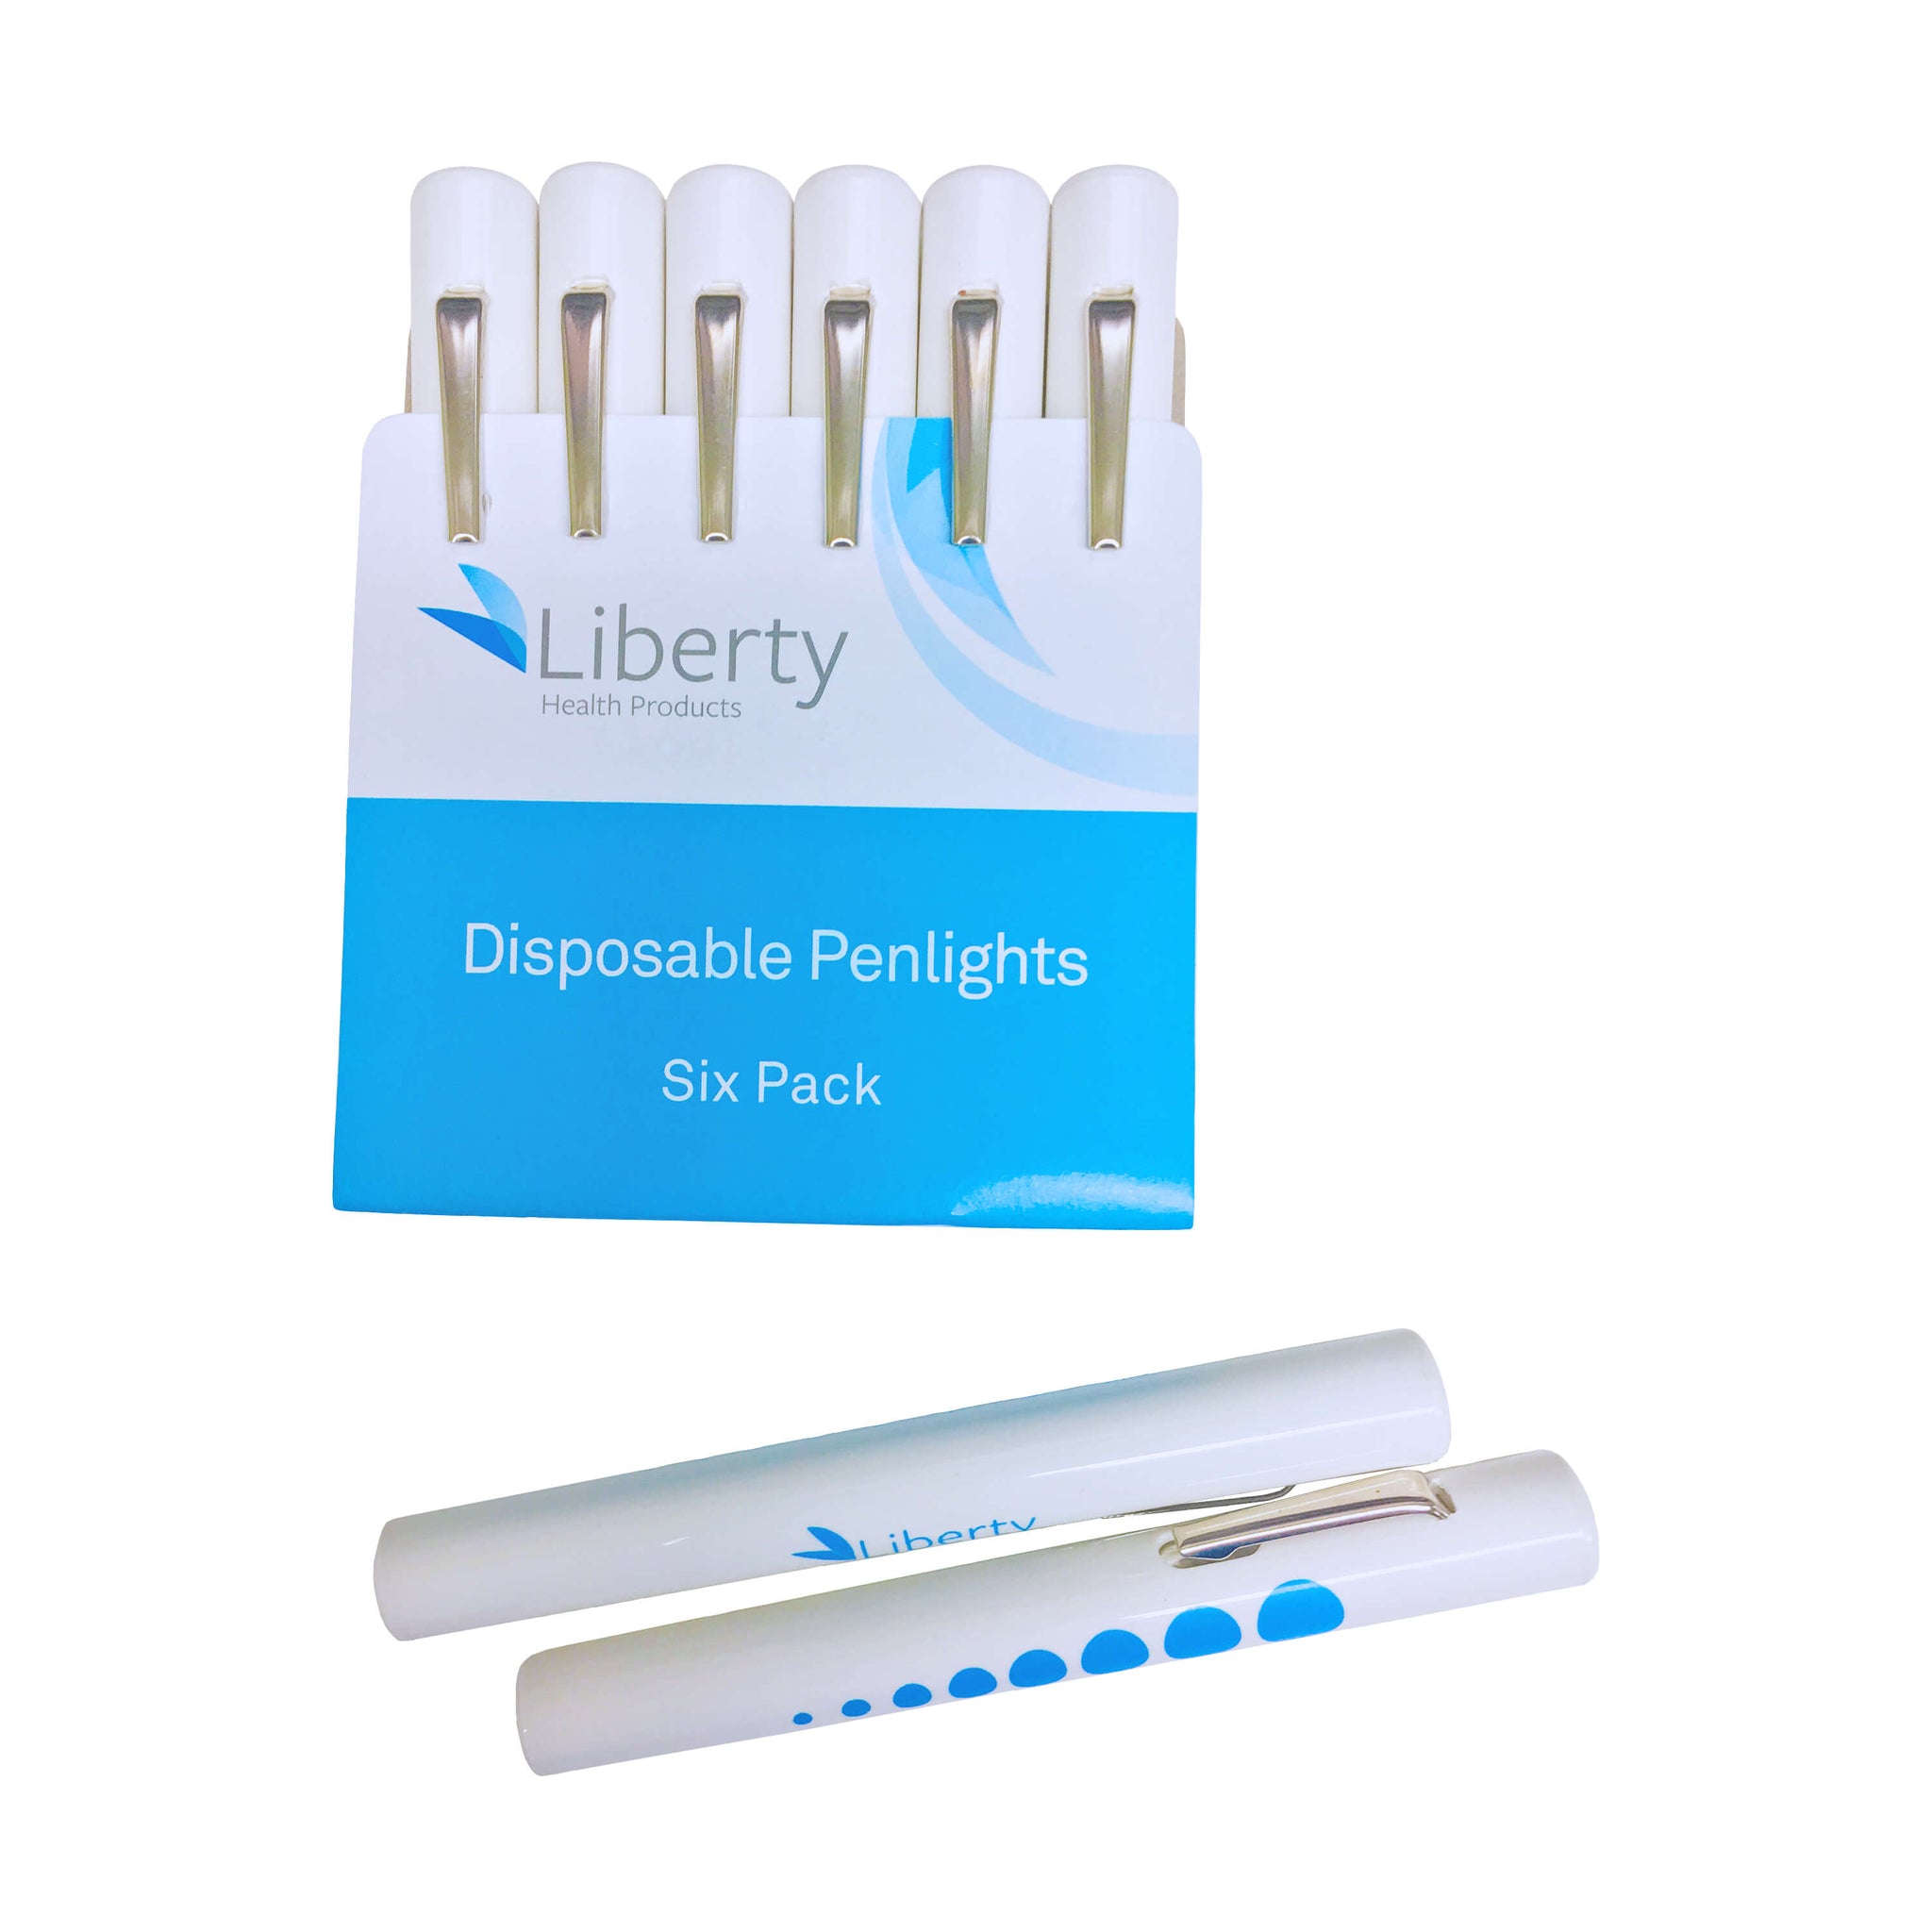 Liberty Disposable Penlight Torches - 6 Pack